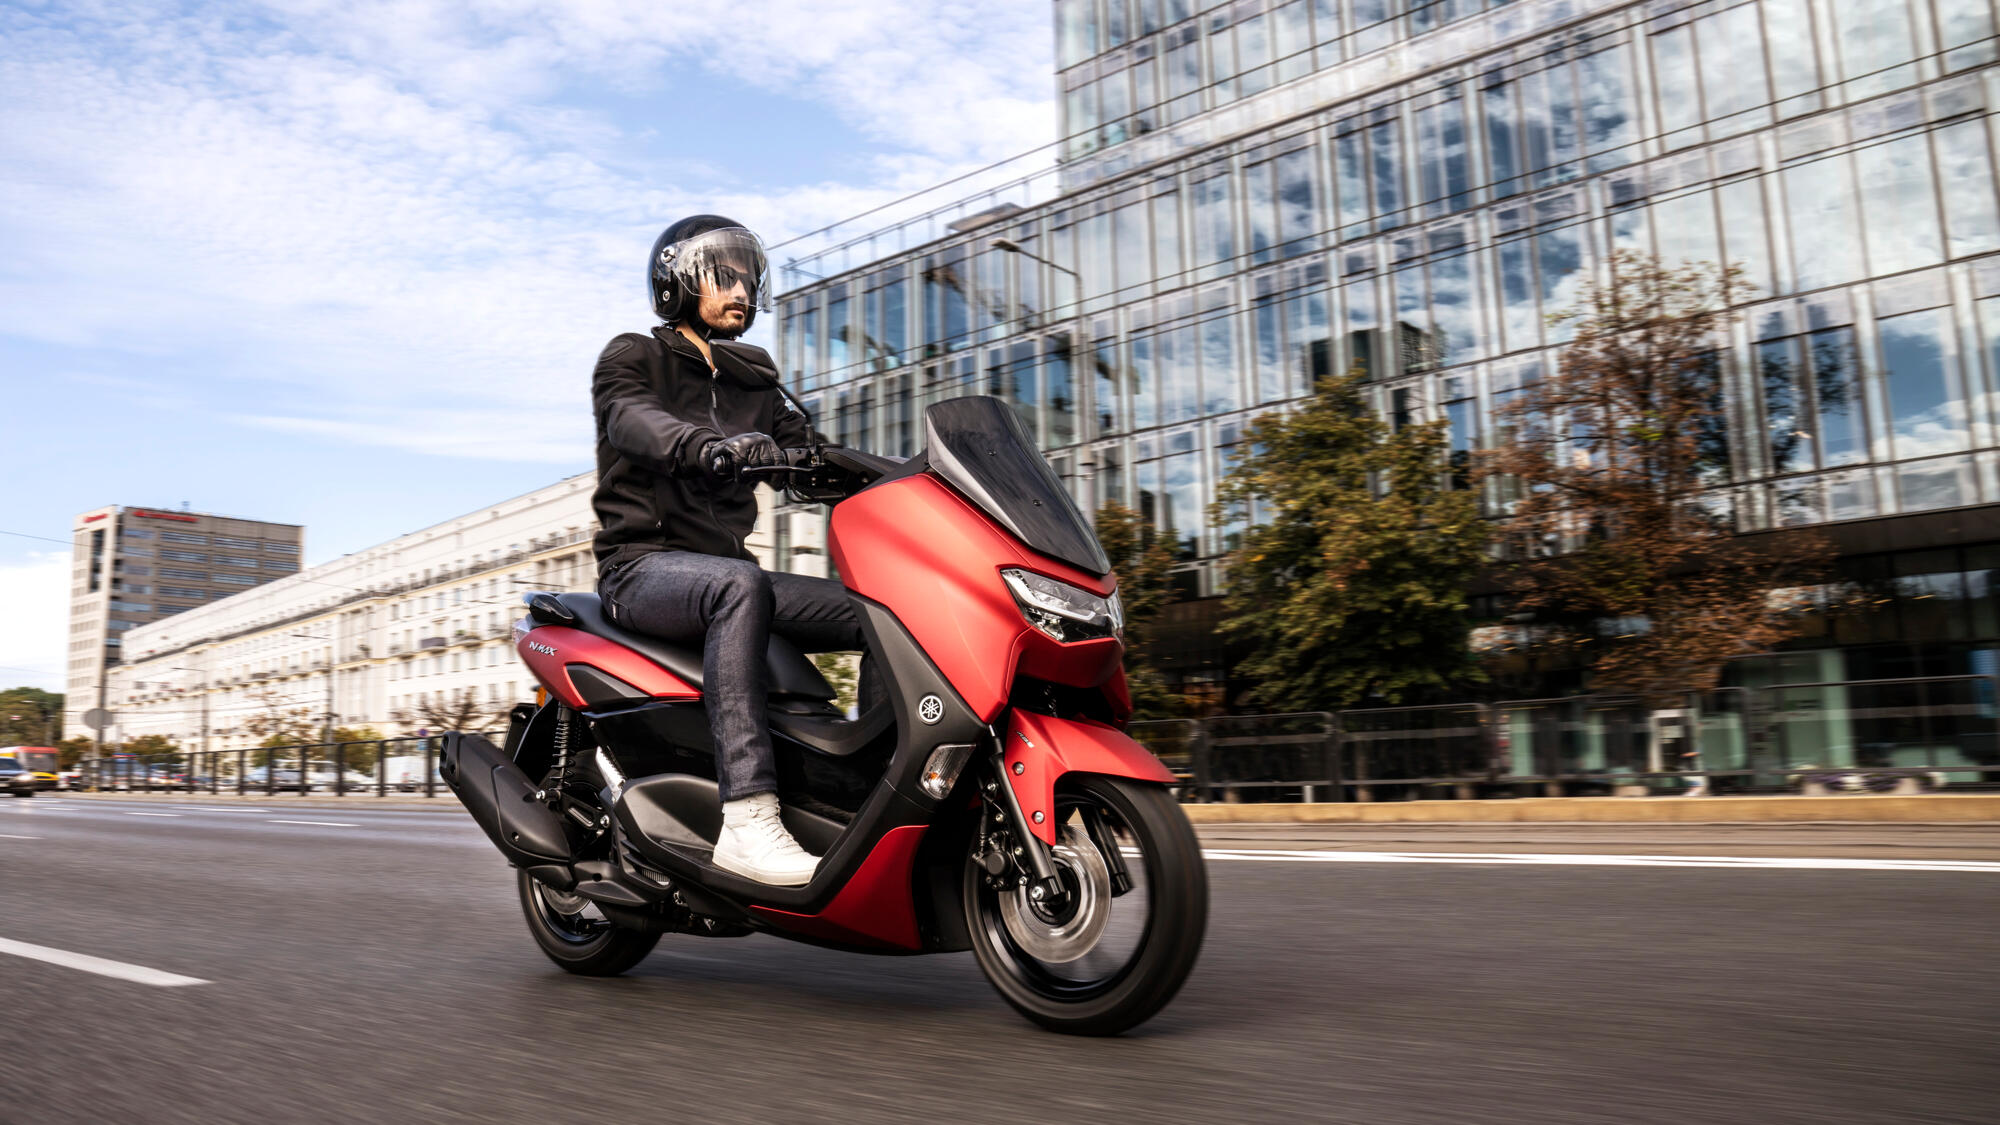 For 2021 Yamaha Offers The New Nmax 125/155 And New D’elight 125